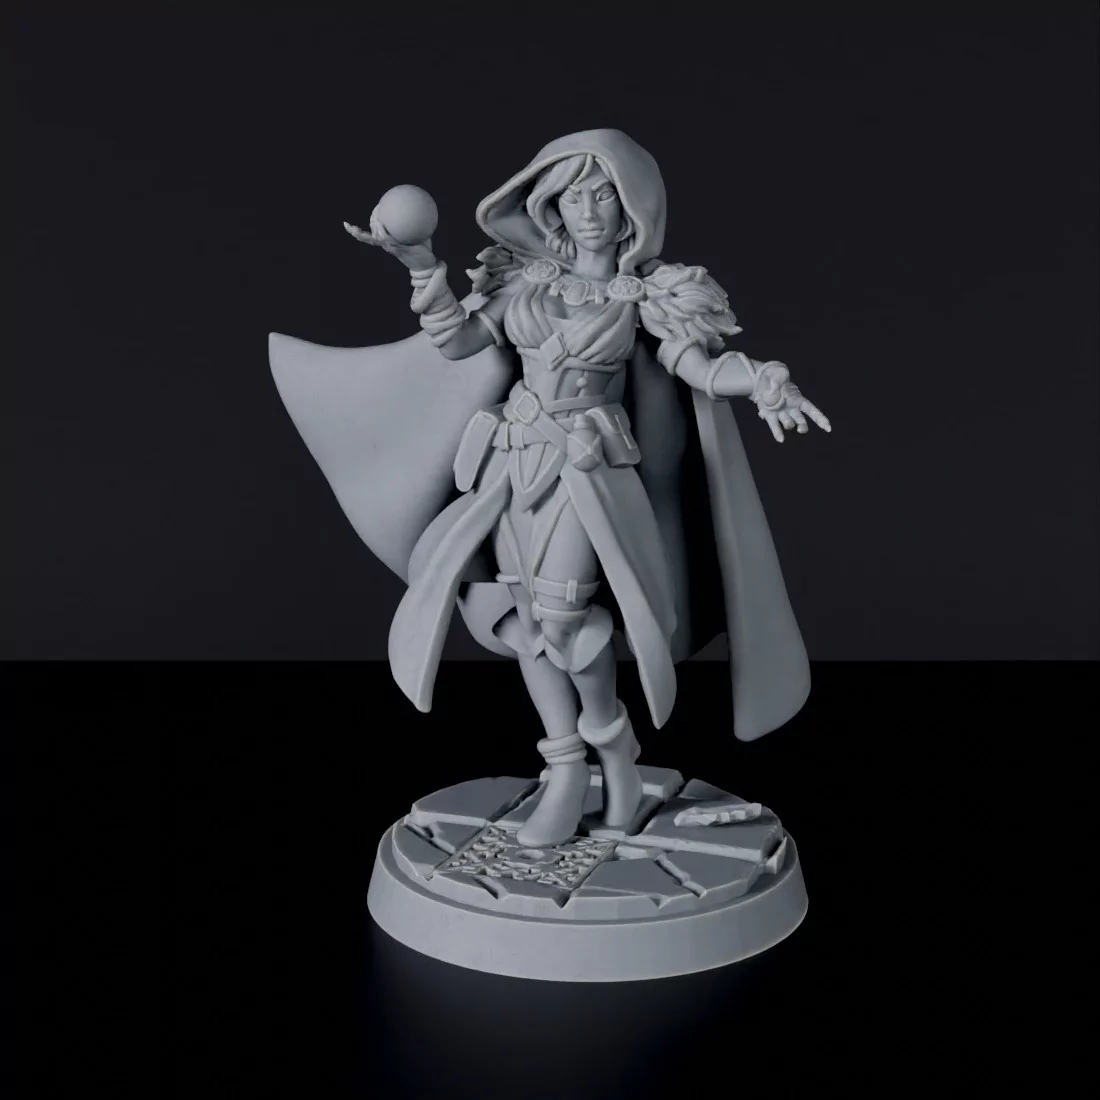 Miniature of Human Female Wizard ver. 1 with sphere and cloak - dedicated sorcerer set to army for fantasy tabletop RPG games